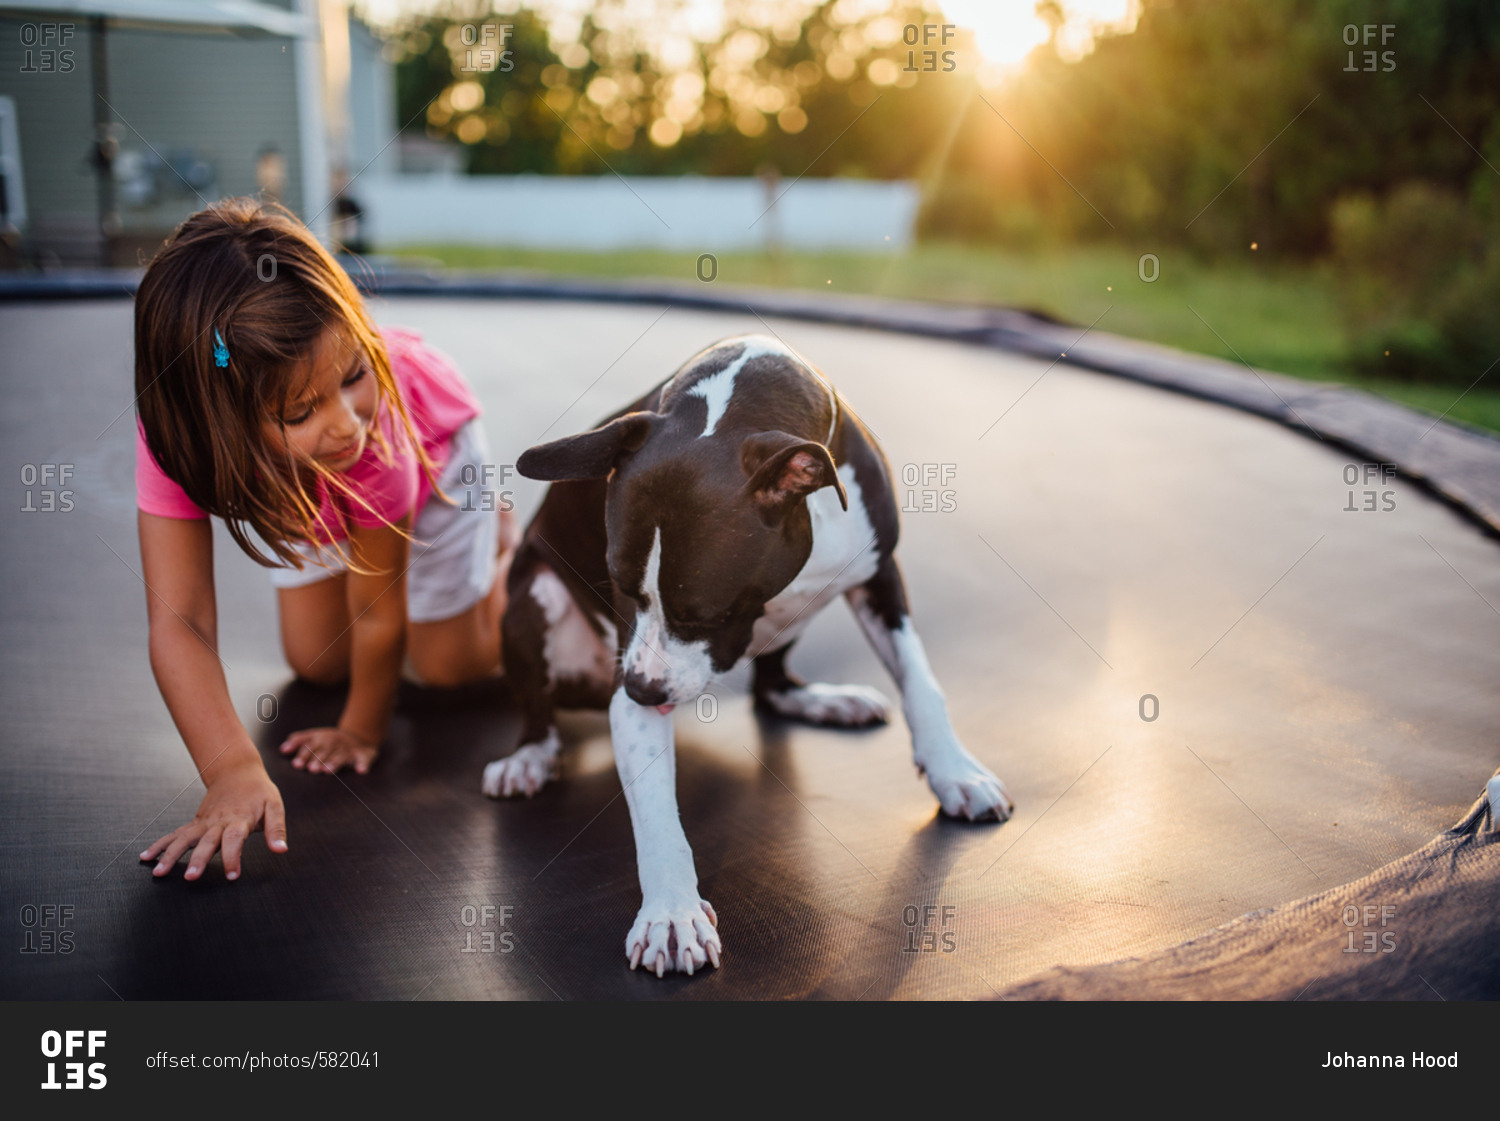 Girl playing on trampoline with her pet dog